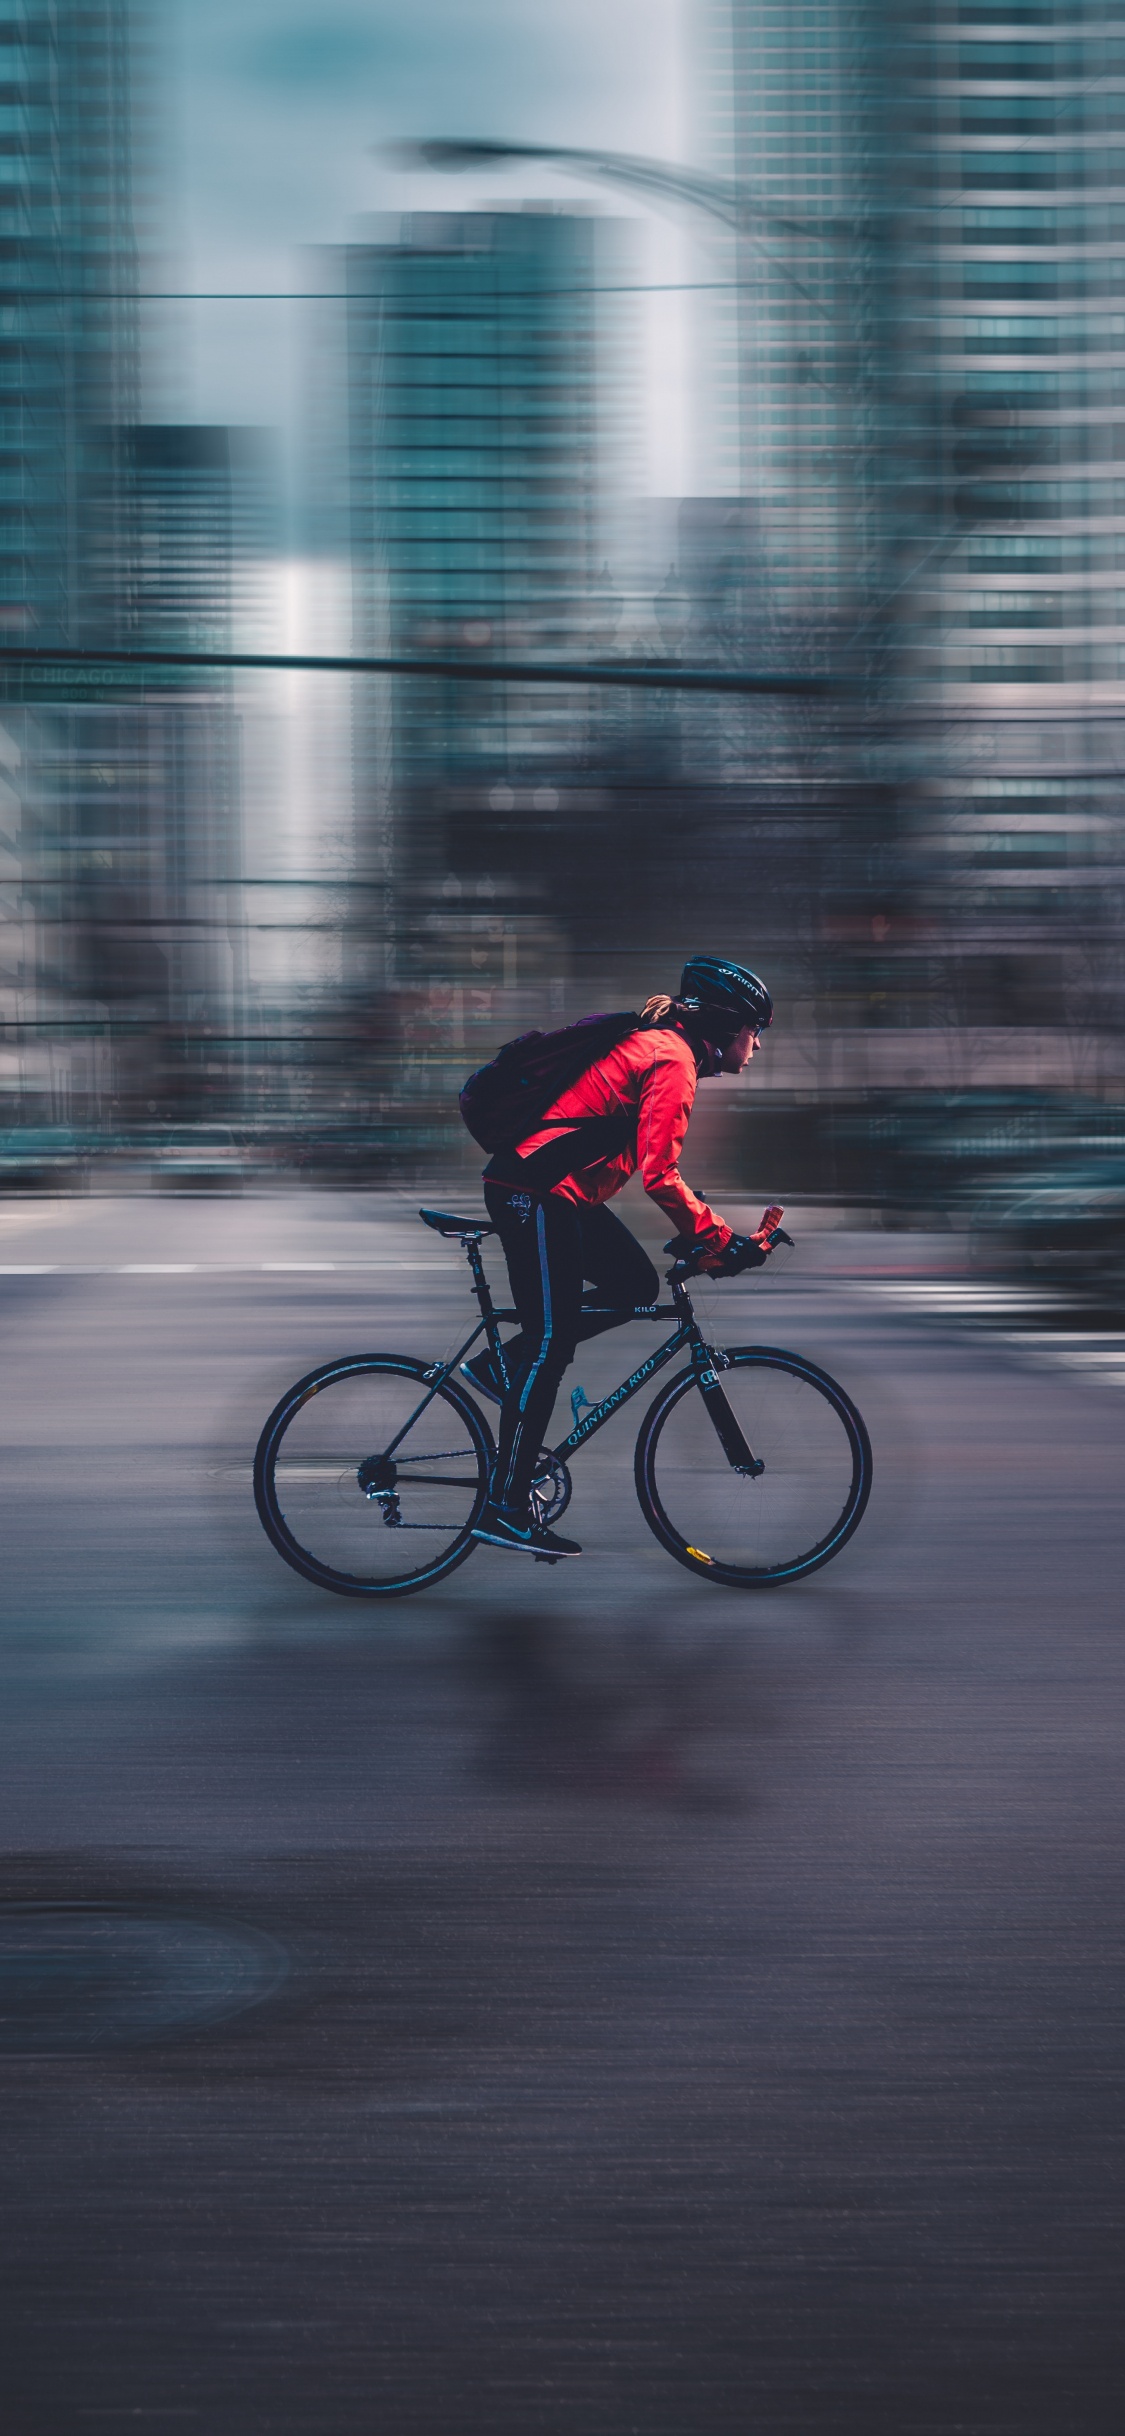 Man in Red Jacket Riding Bicycle Sur Route Pendant la Journée. Wallpaper in 1125x2436 Resolution